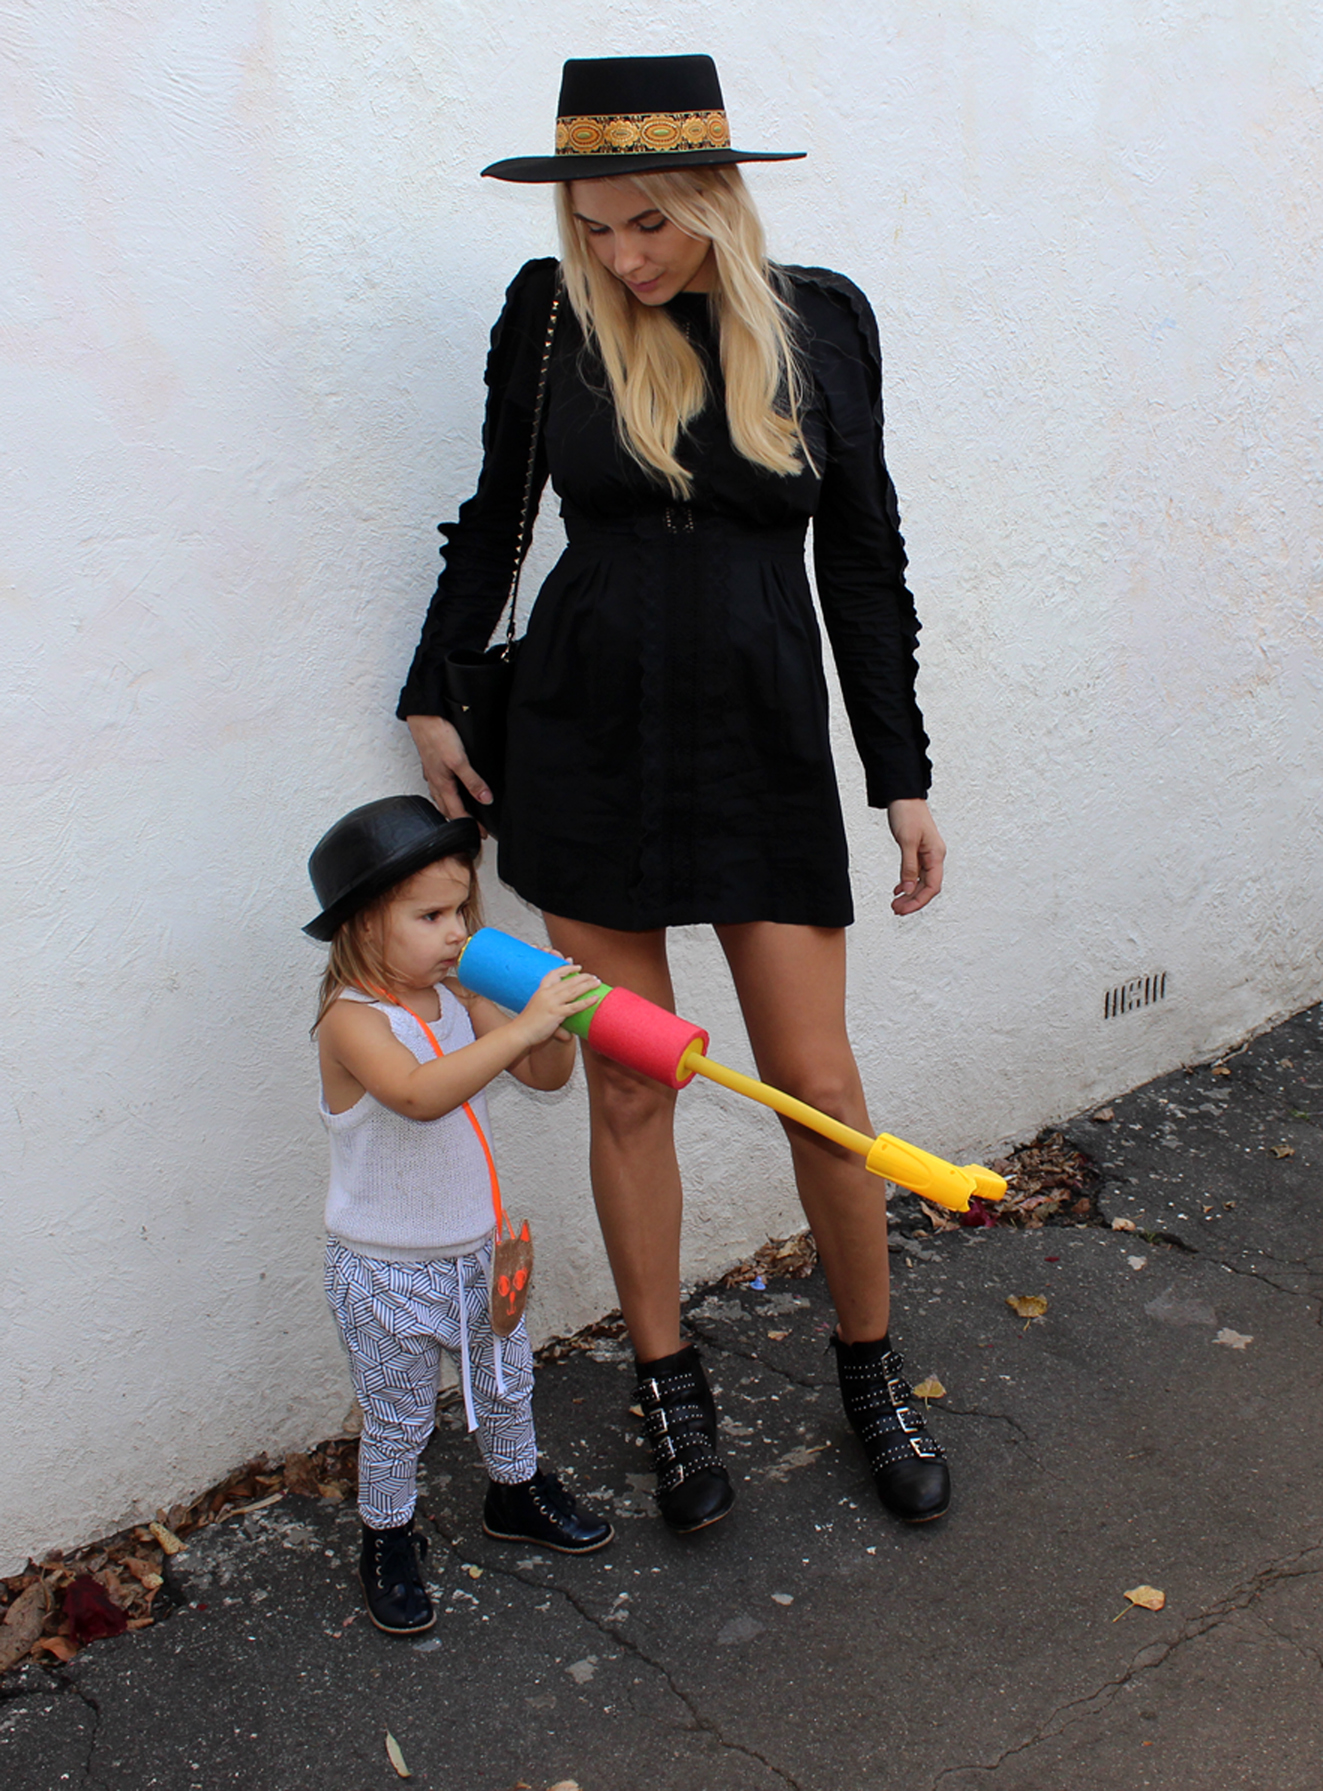 Monochrome Joggers street style. Mommy and me fashion.